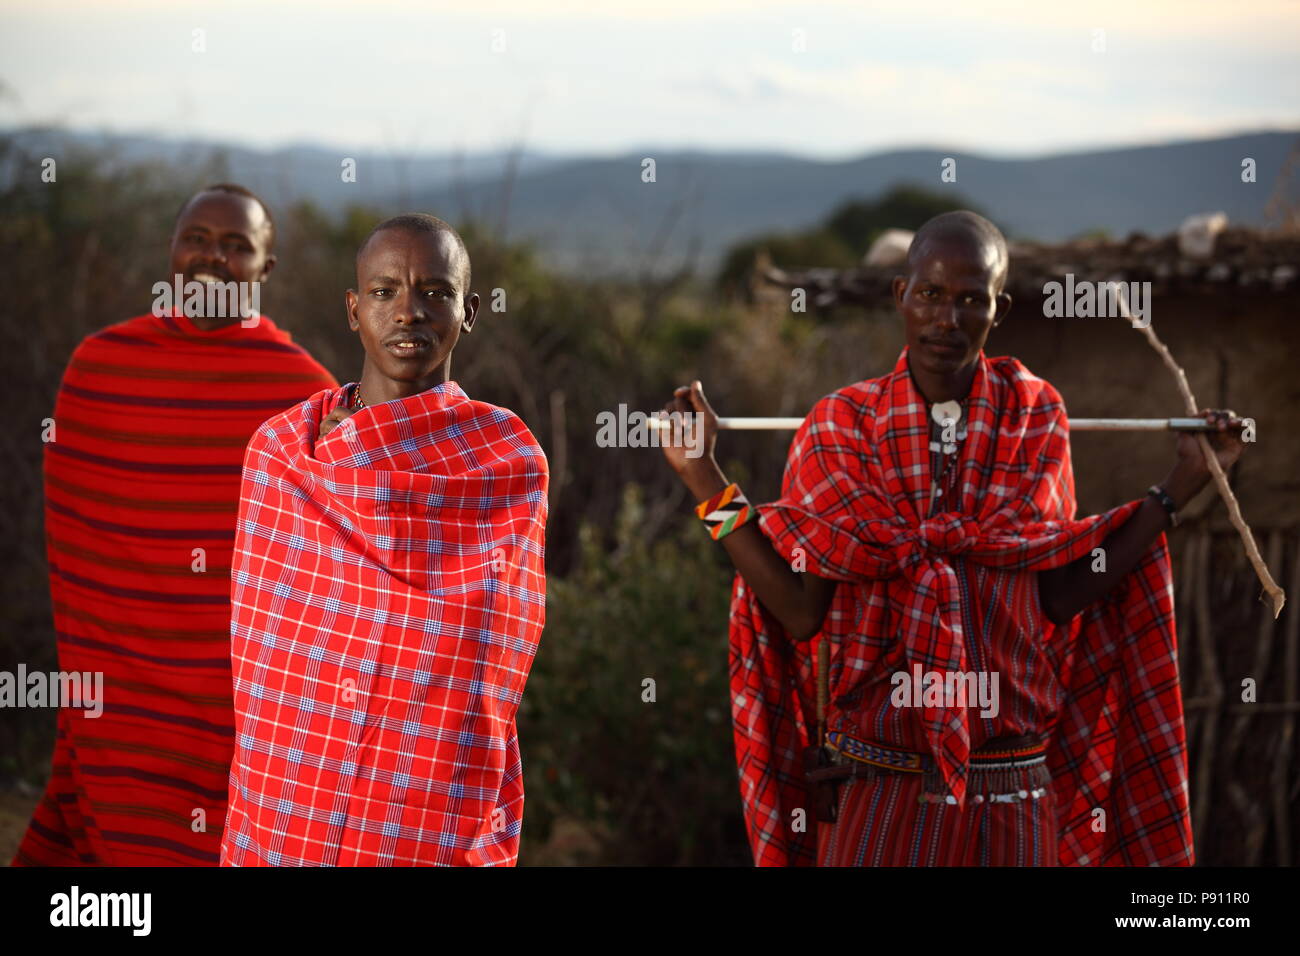 Maasai traditional men in traditional Maasai red dress smiling portrait Stock Photo